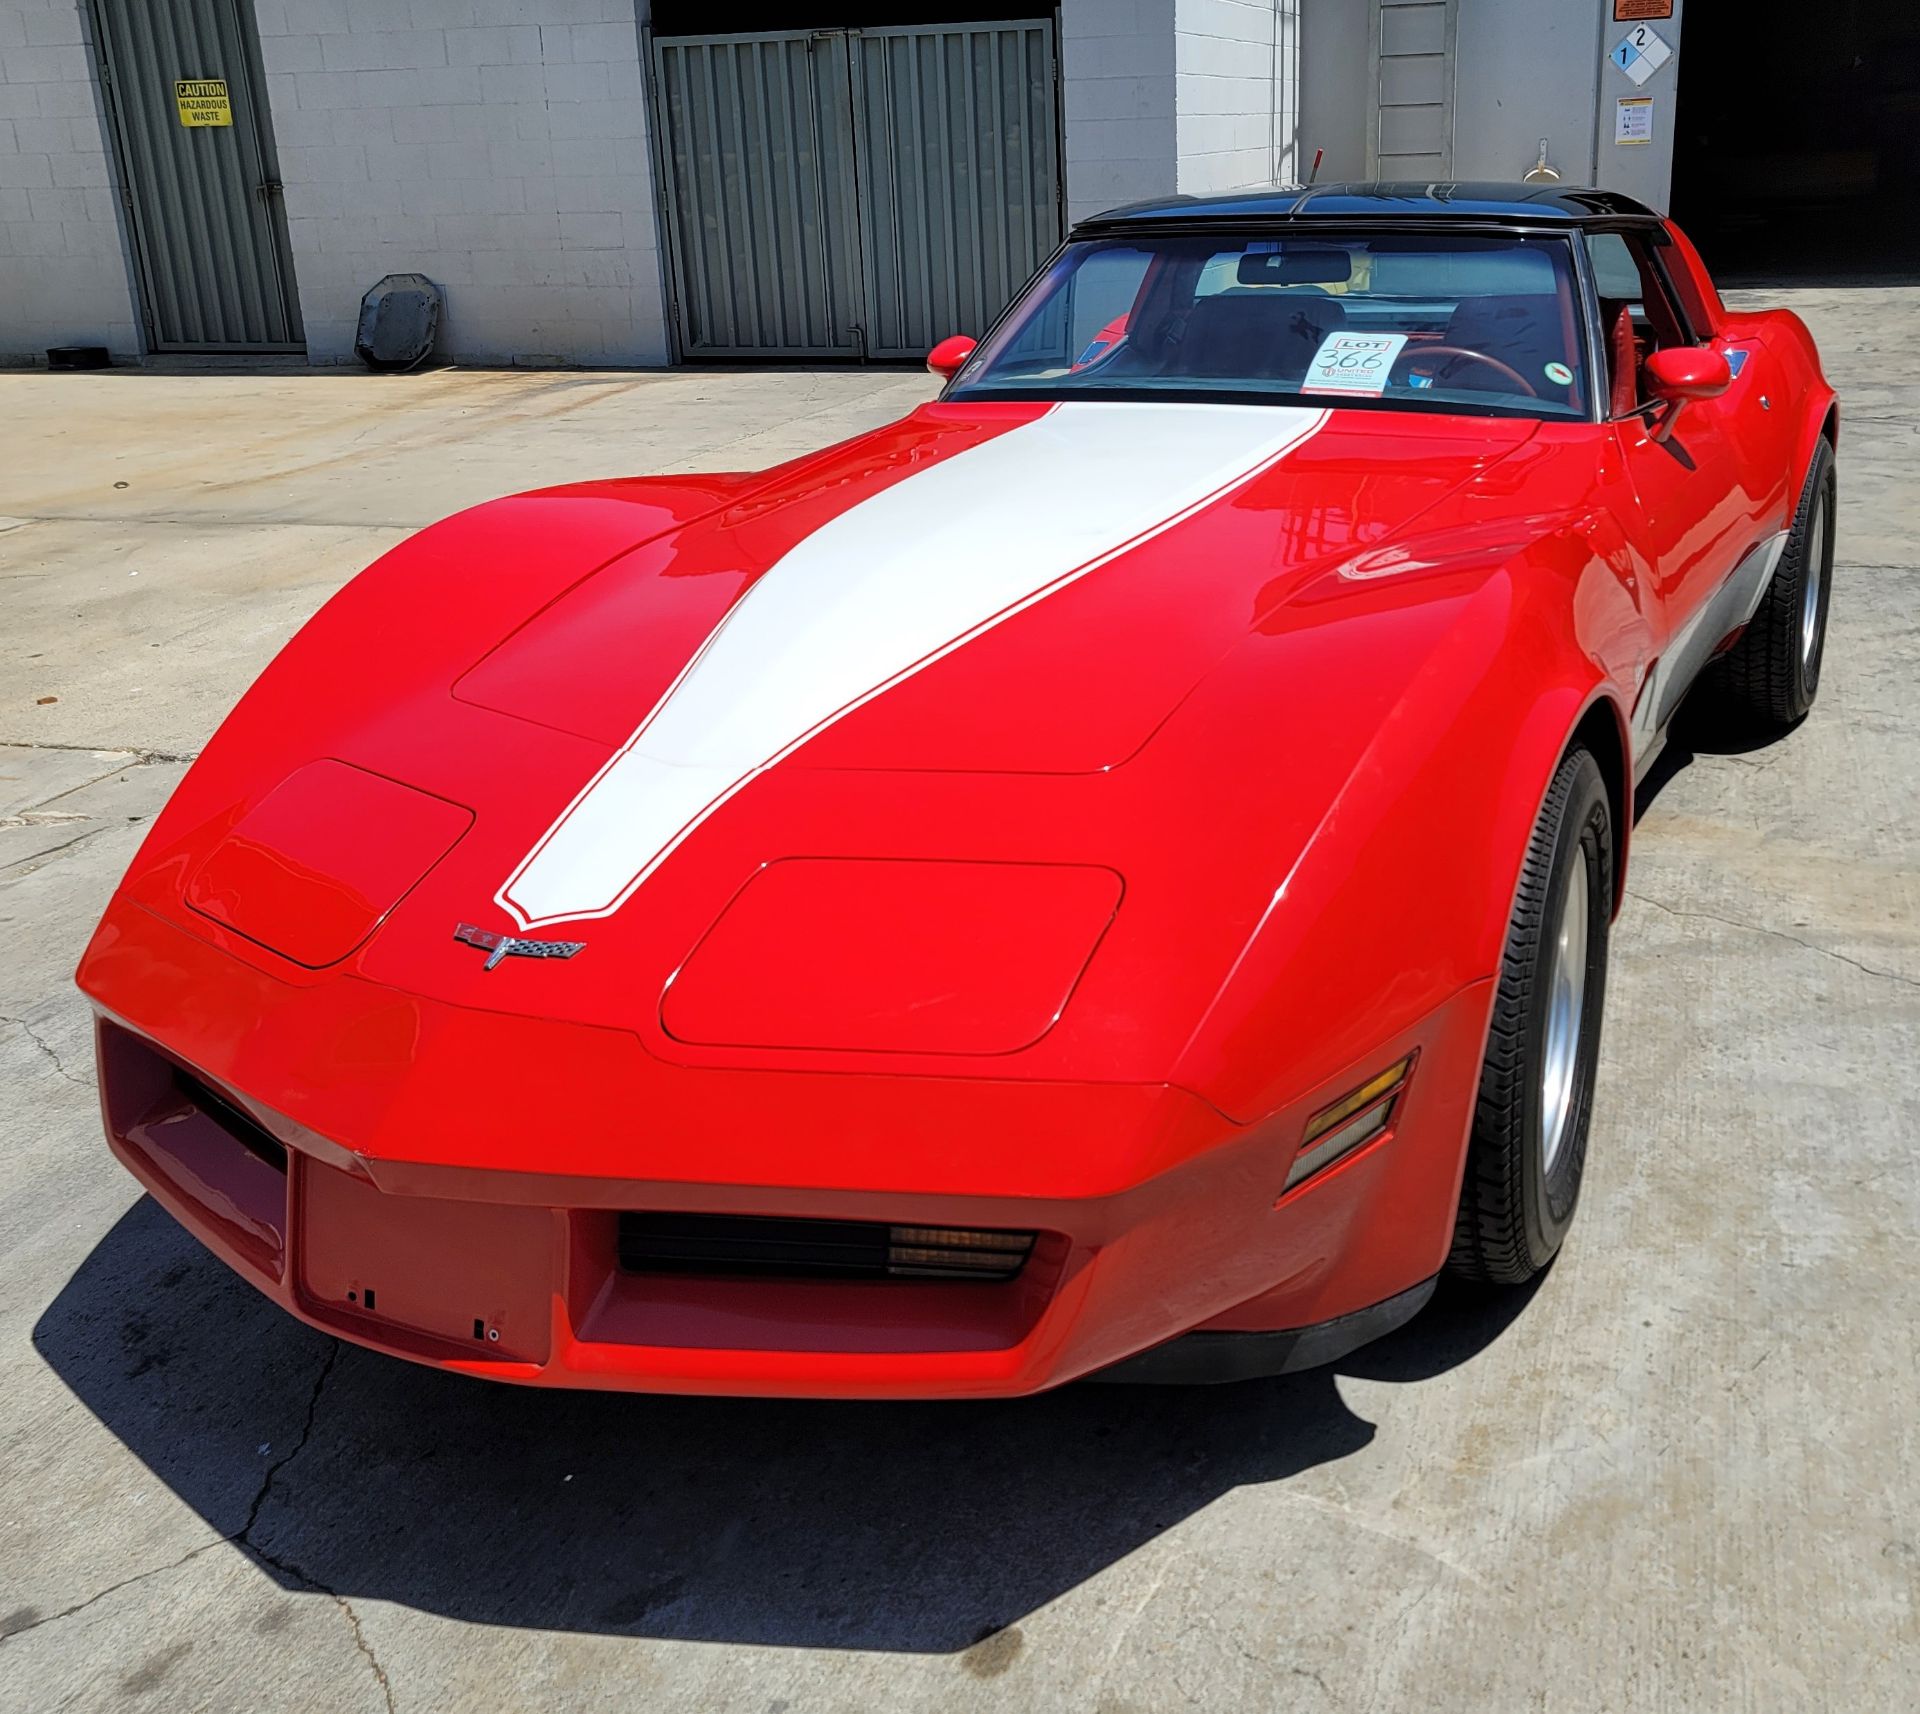 1980 CHEVROLET CORVETTE, WAS VIC EDELBROCK'S PERSONAL CAR BOUGHT FOR R&D, RED INTERIOR, TITLE ONLY. - Image 33 of 70